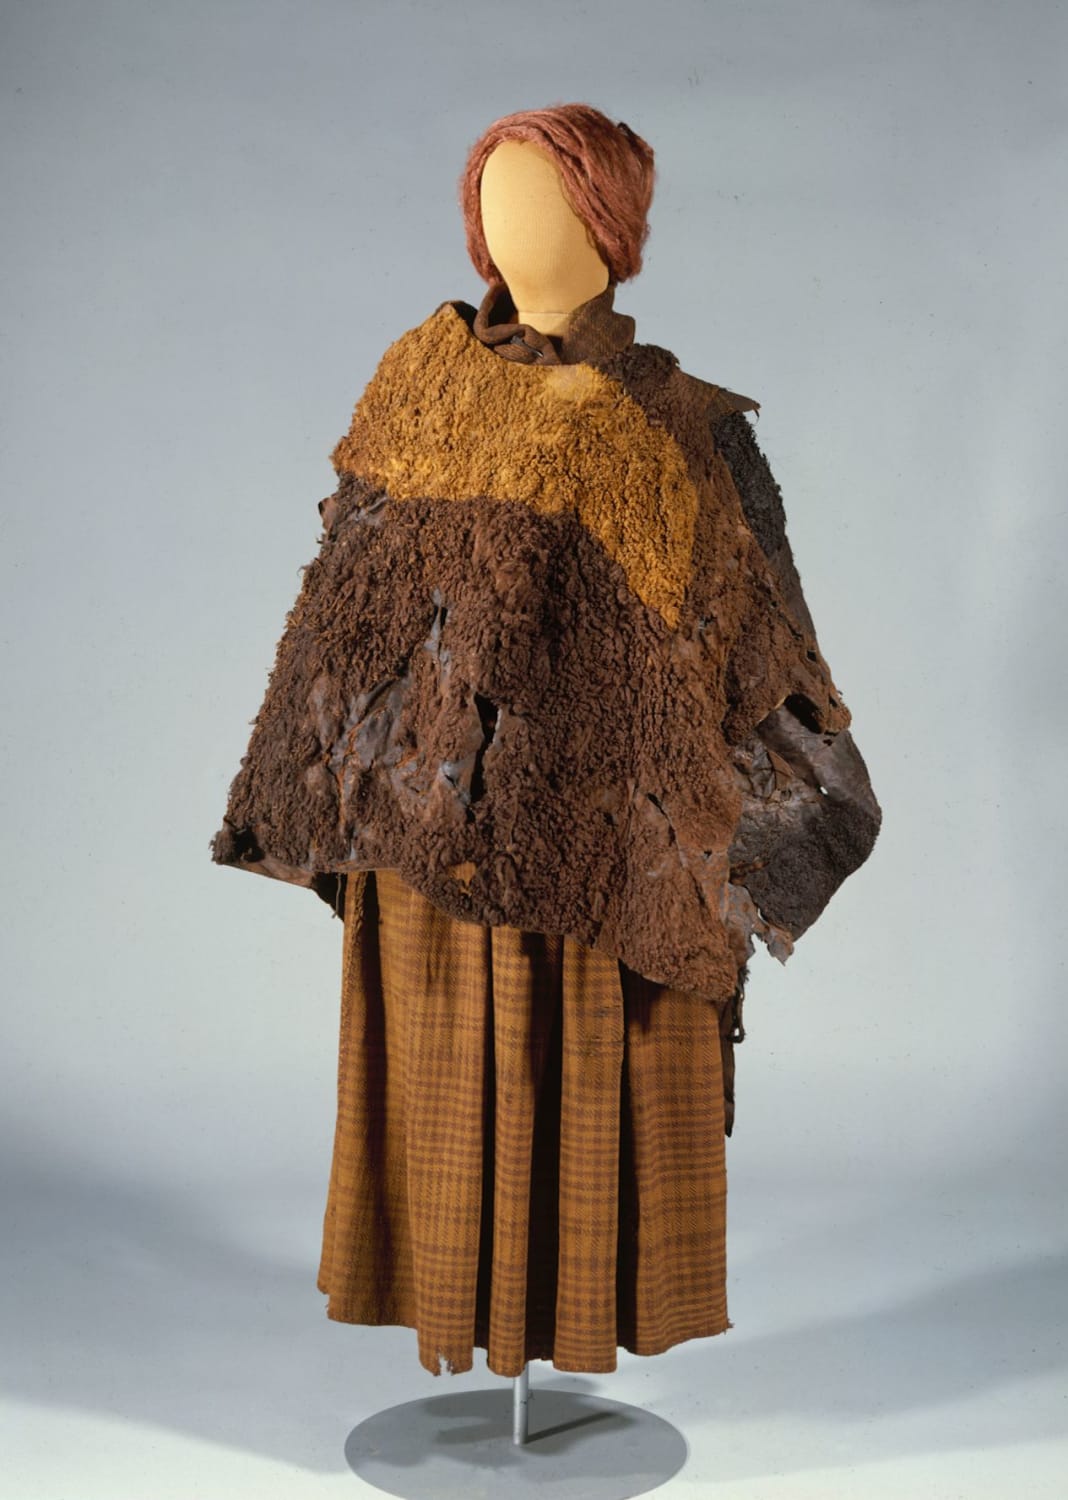 The 2000-year-old clothes of the Huldremose Woman, a bog body recovered in 1879 from a peat bog near Ramten in Denmark. It consists of a checked woollen skirt, a checked woollen scarf and two skin capes. Now on display at the National Museum of Denmark